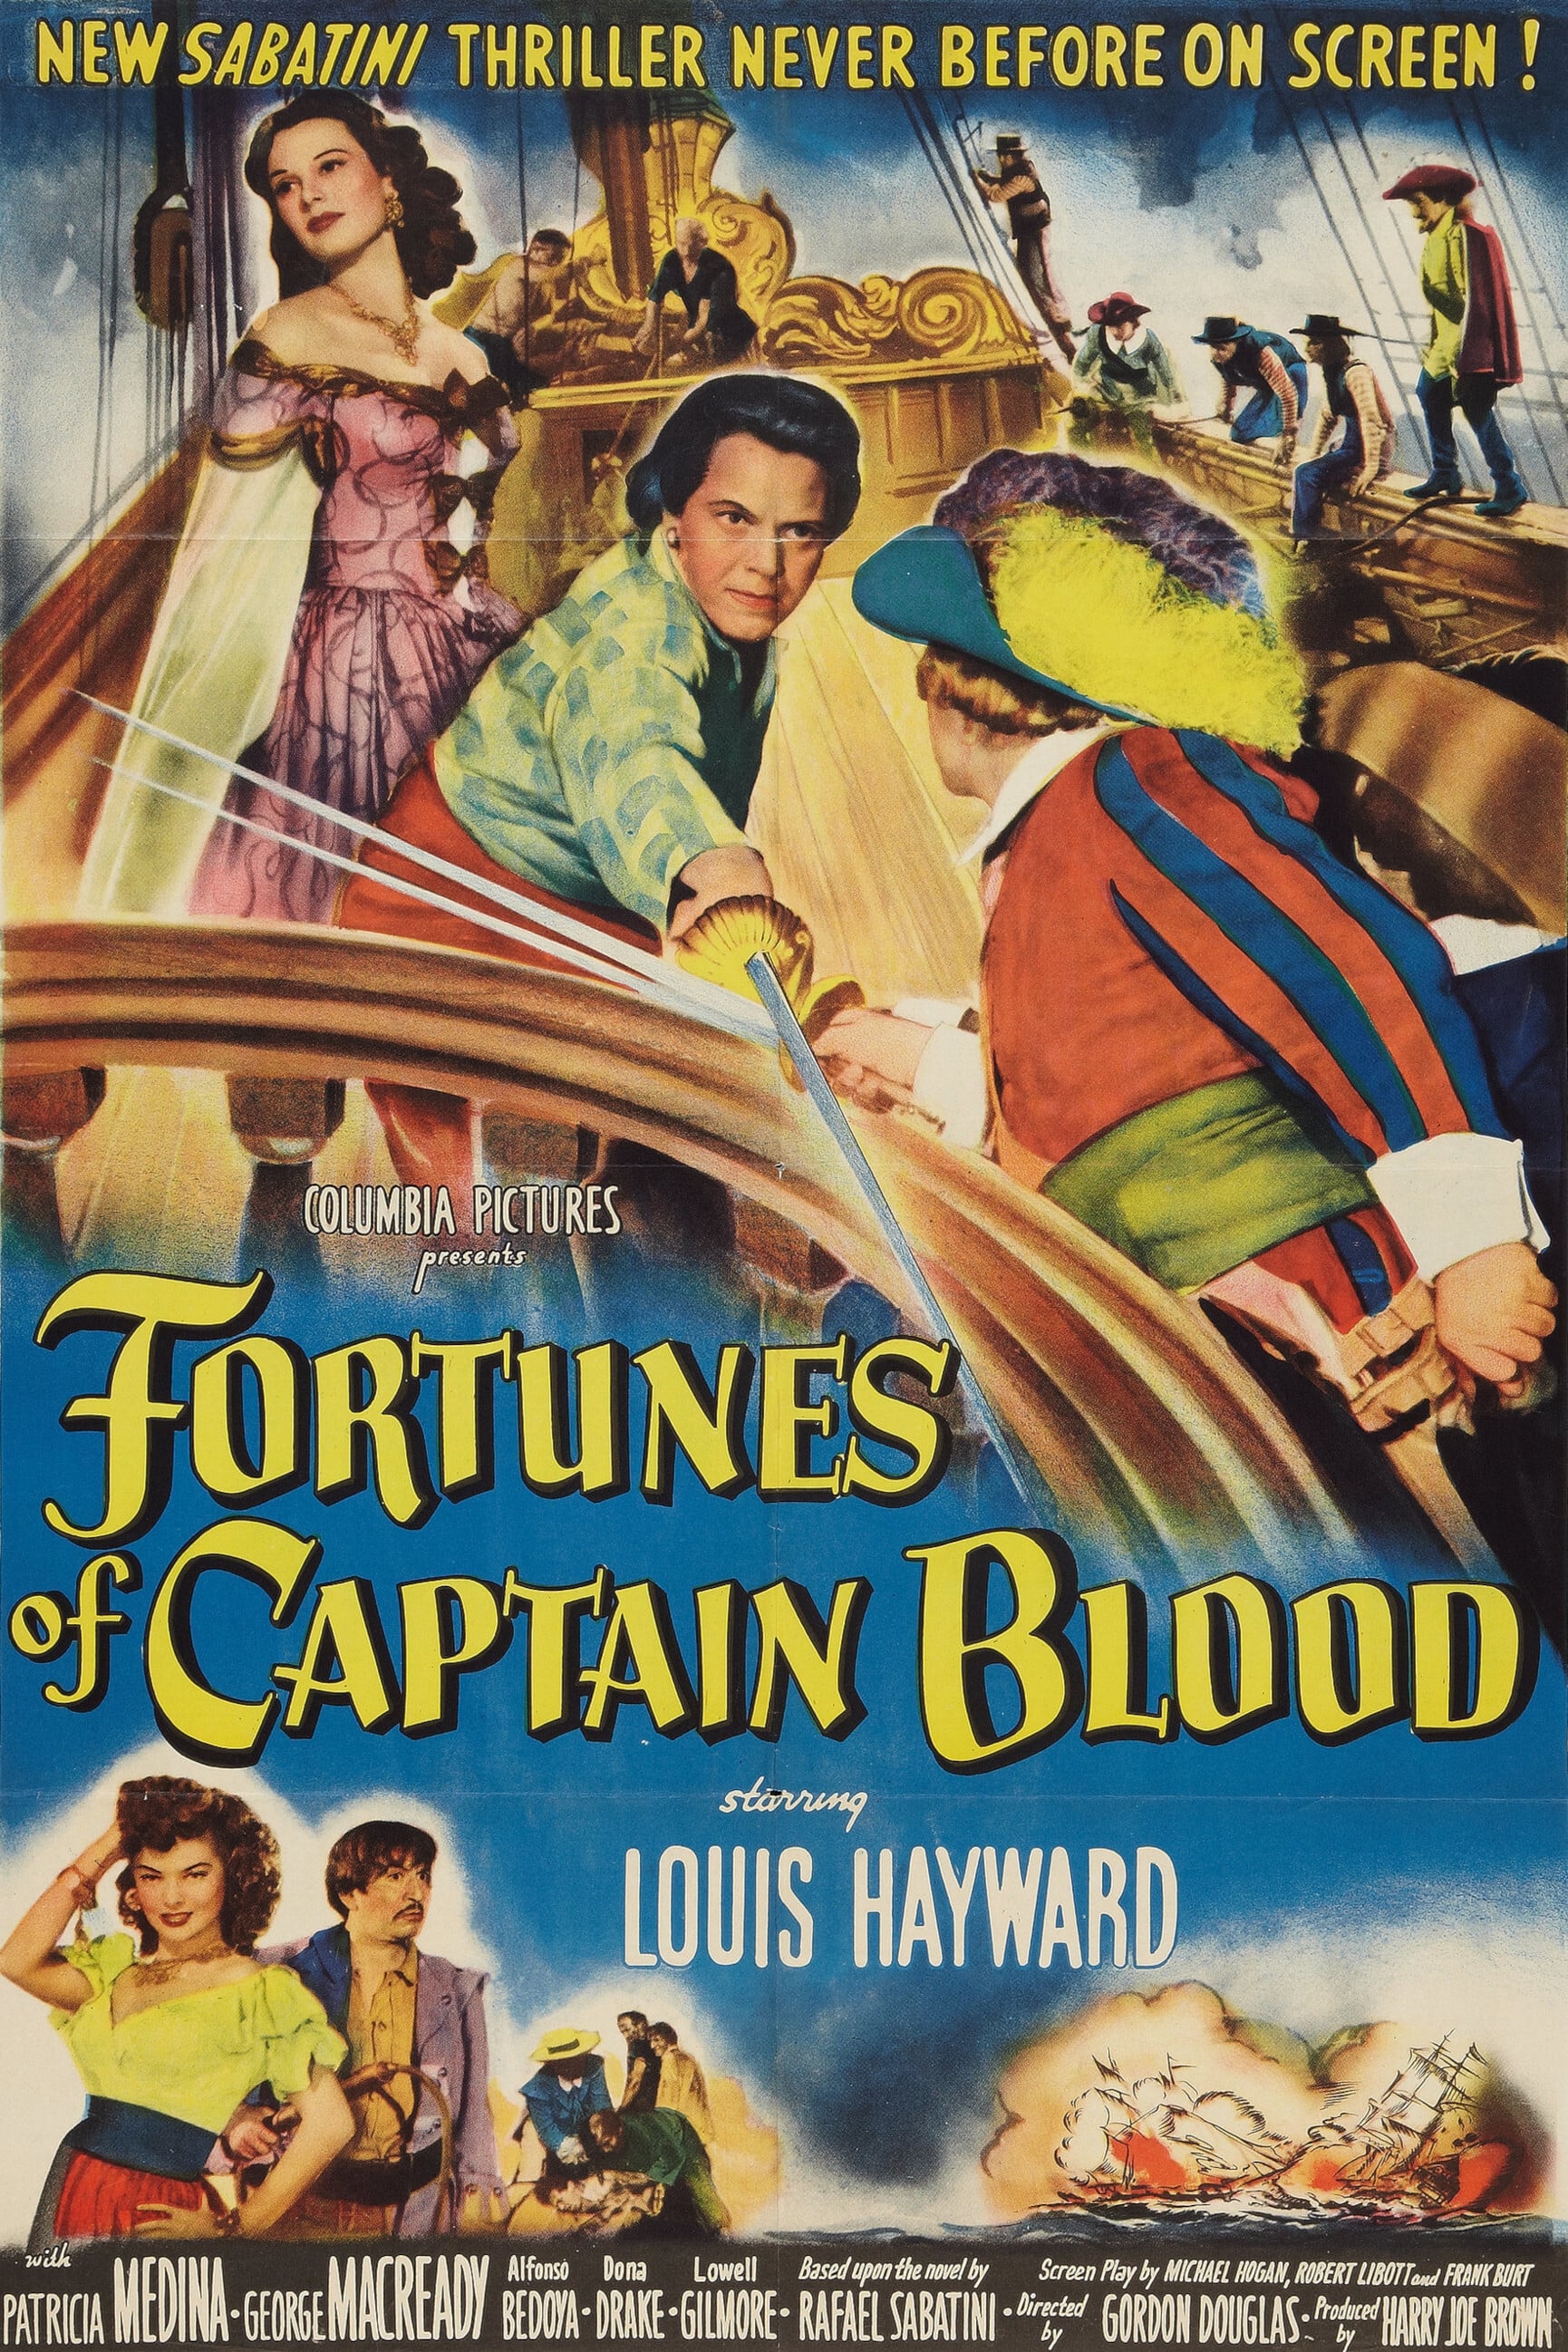 Fortunes of Captain Blood (1950)